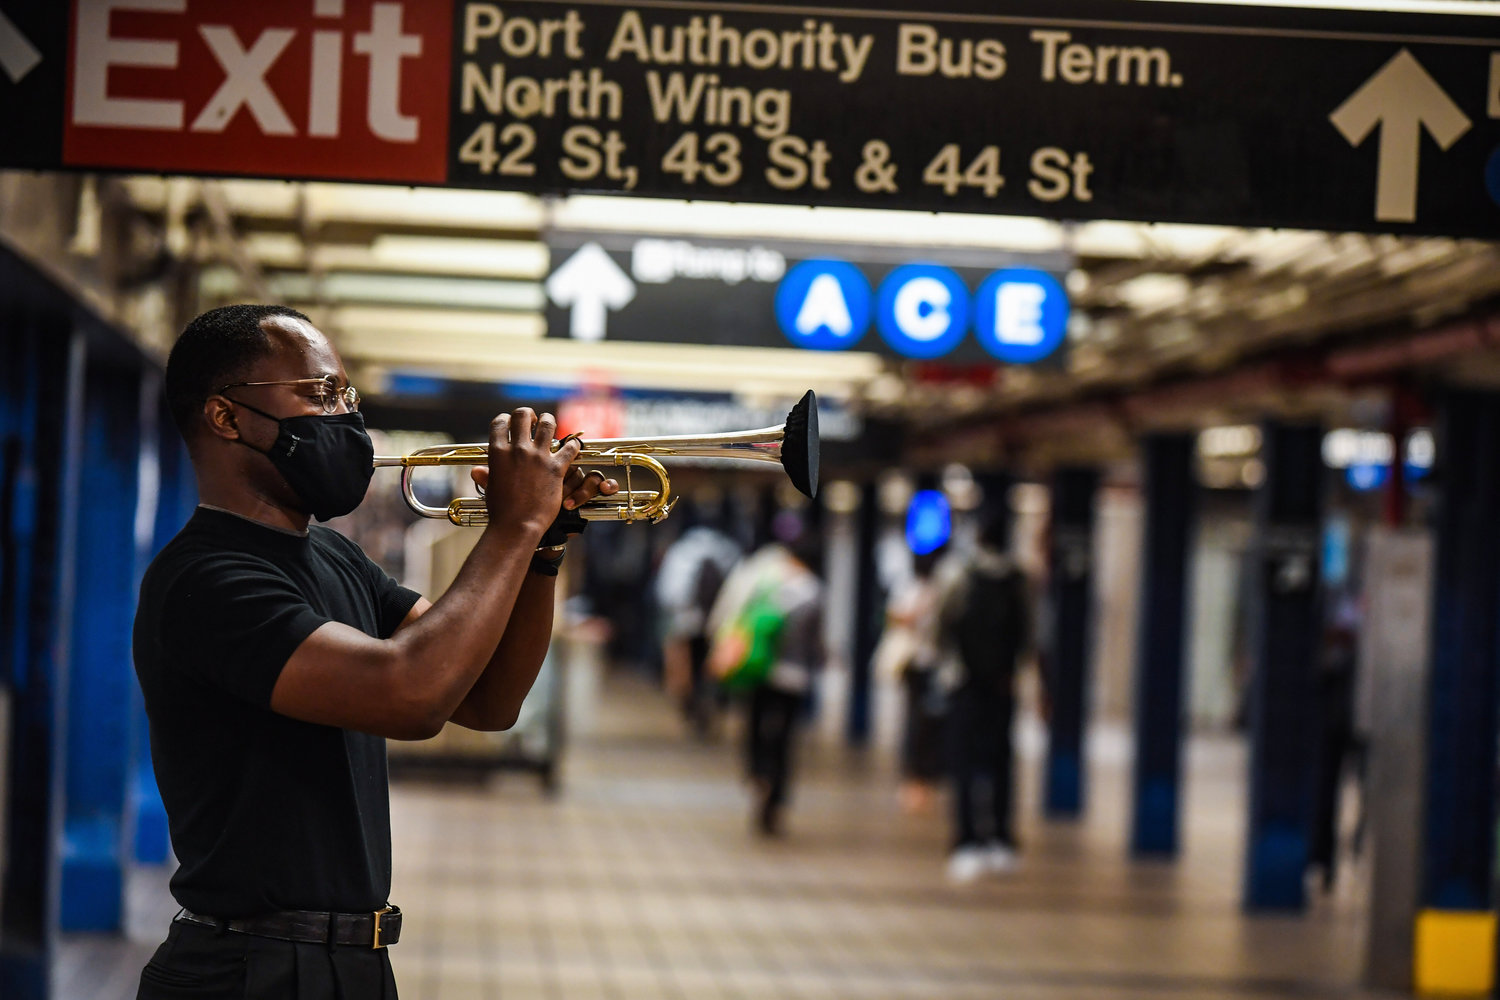 Trumpeter Eganam Segbefia at played his instrument at the 42nd Street/Port Authority station. After a 15-month hiatus because of the pandemic, the MTA’s Music Under New York program returned to the subway system in early June 2021.